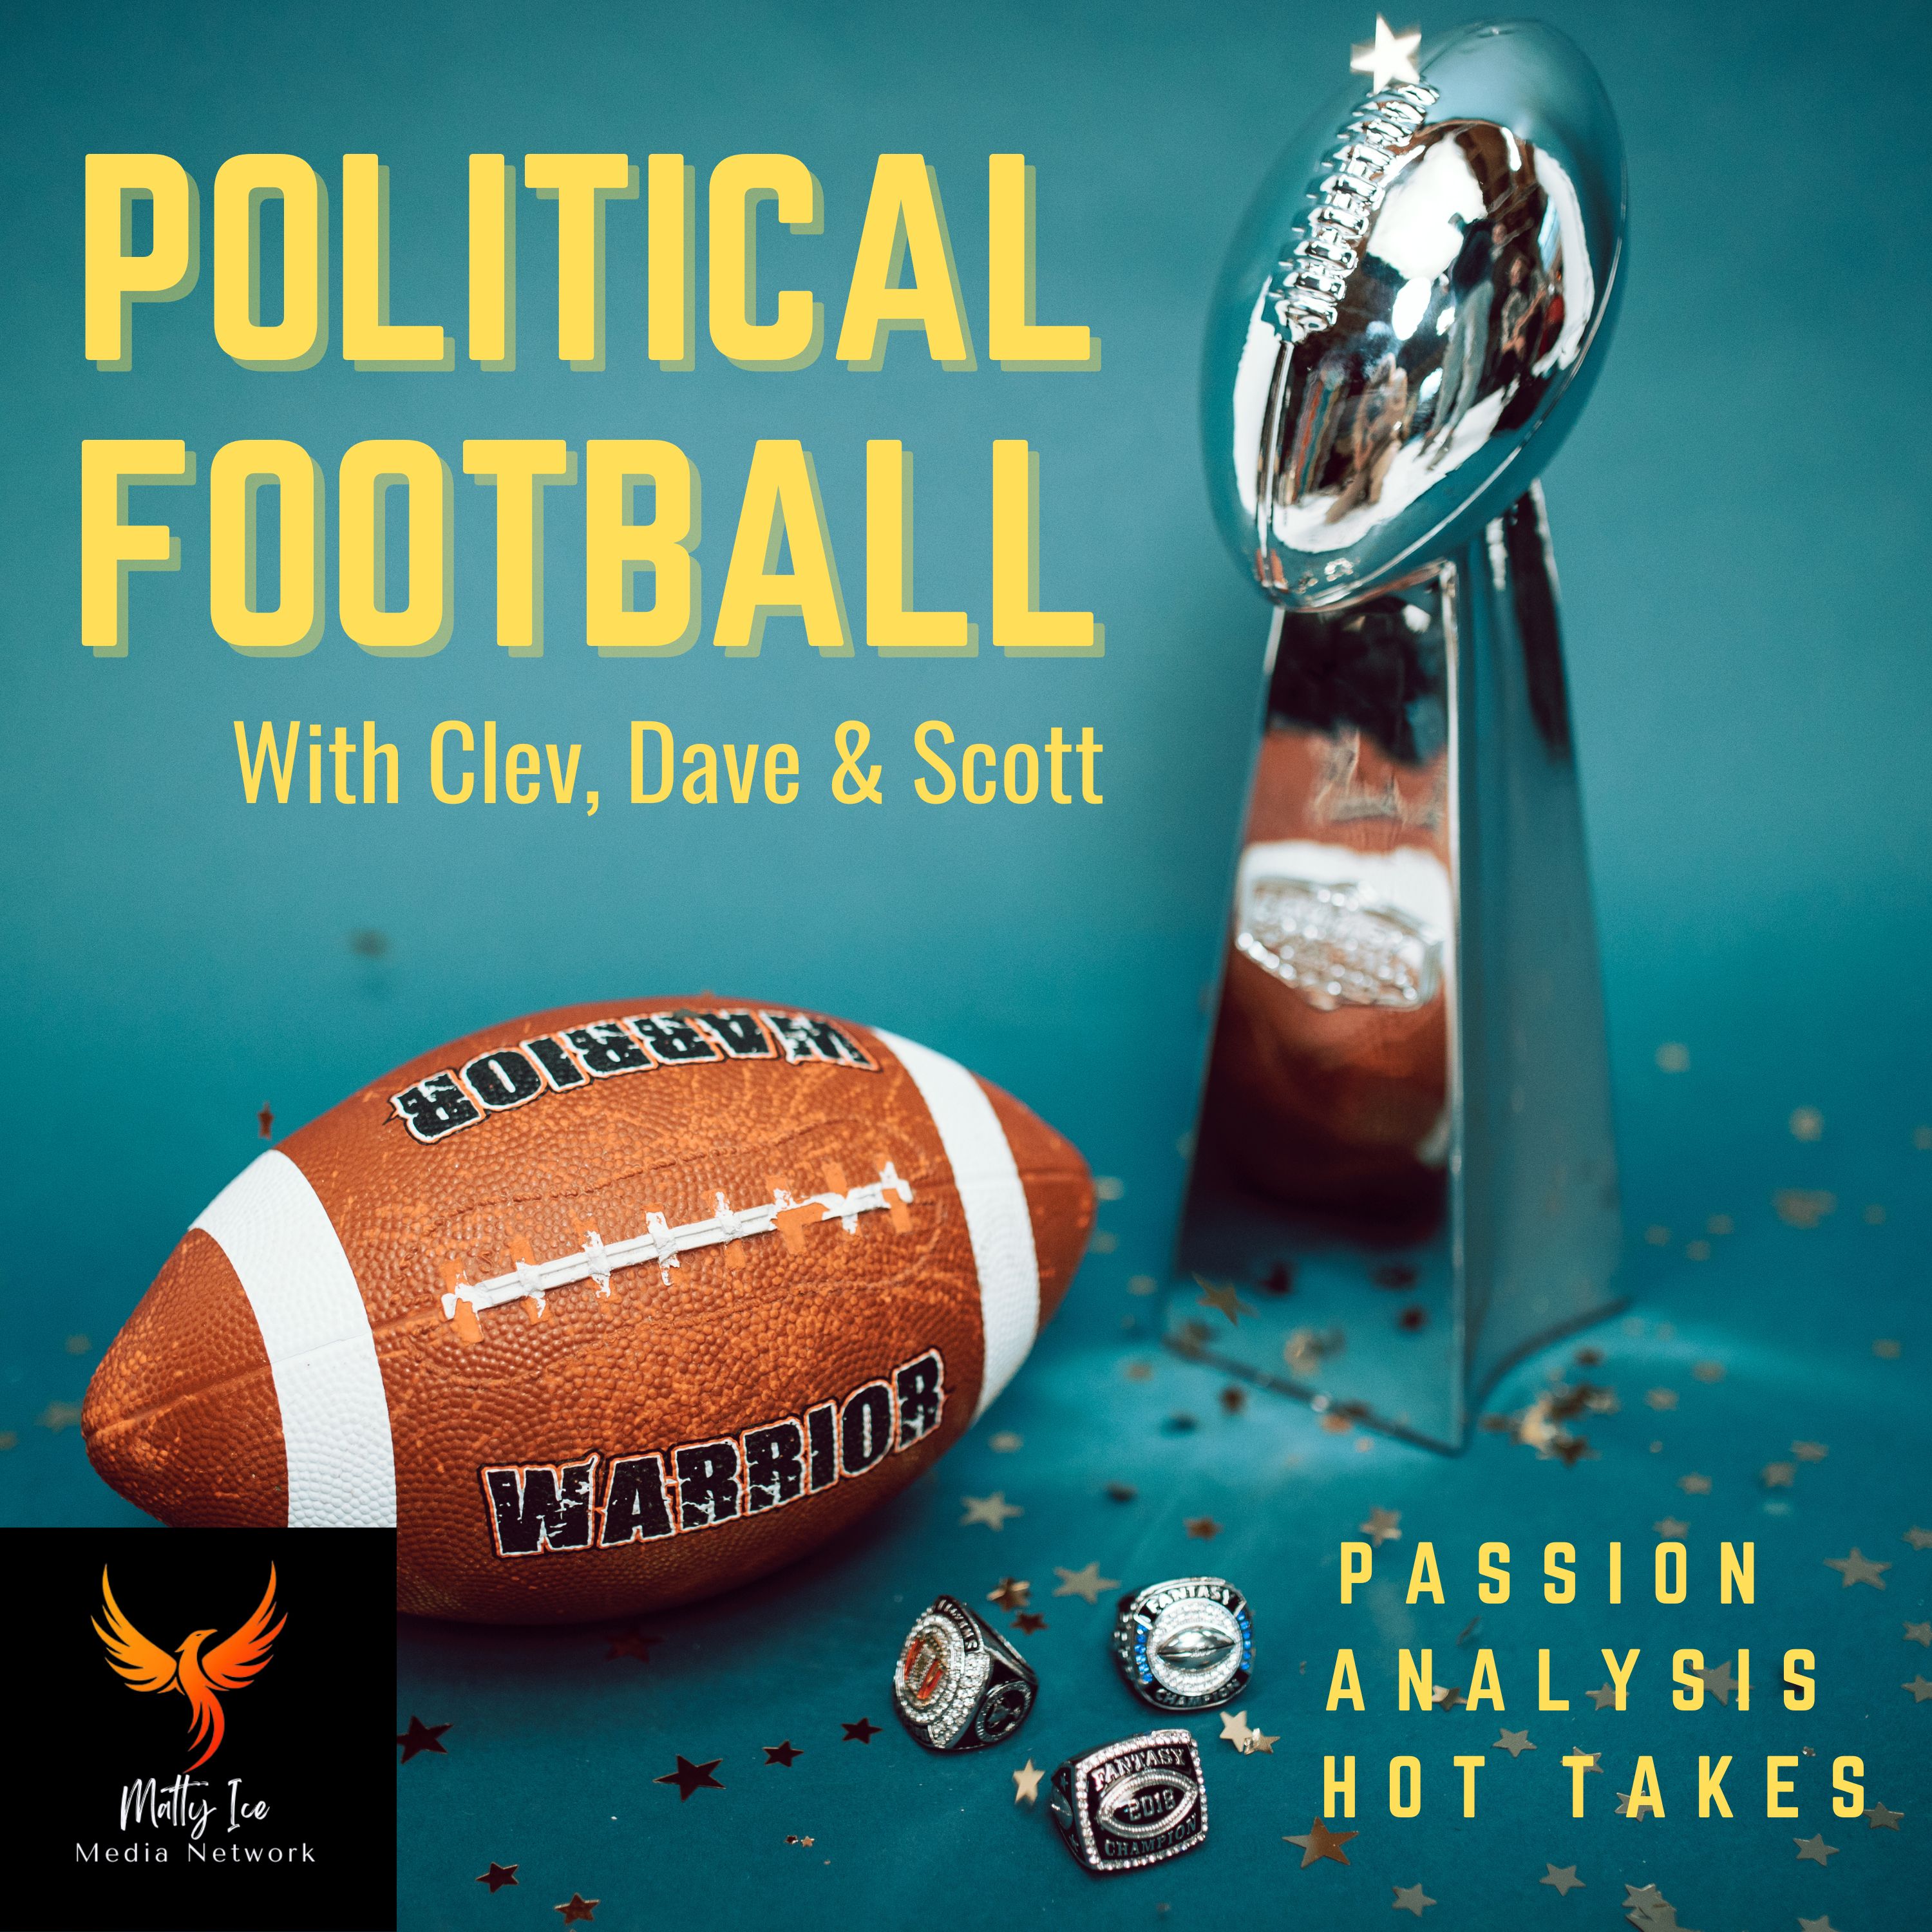 Political Football with Clev, Dave & Scott